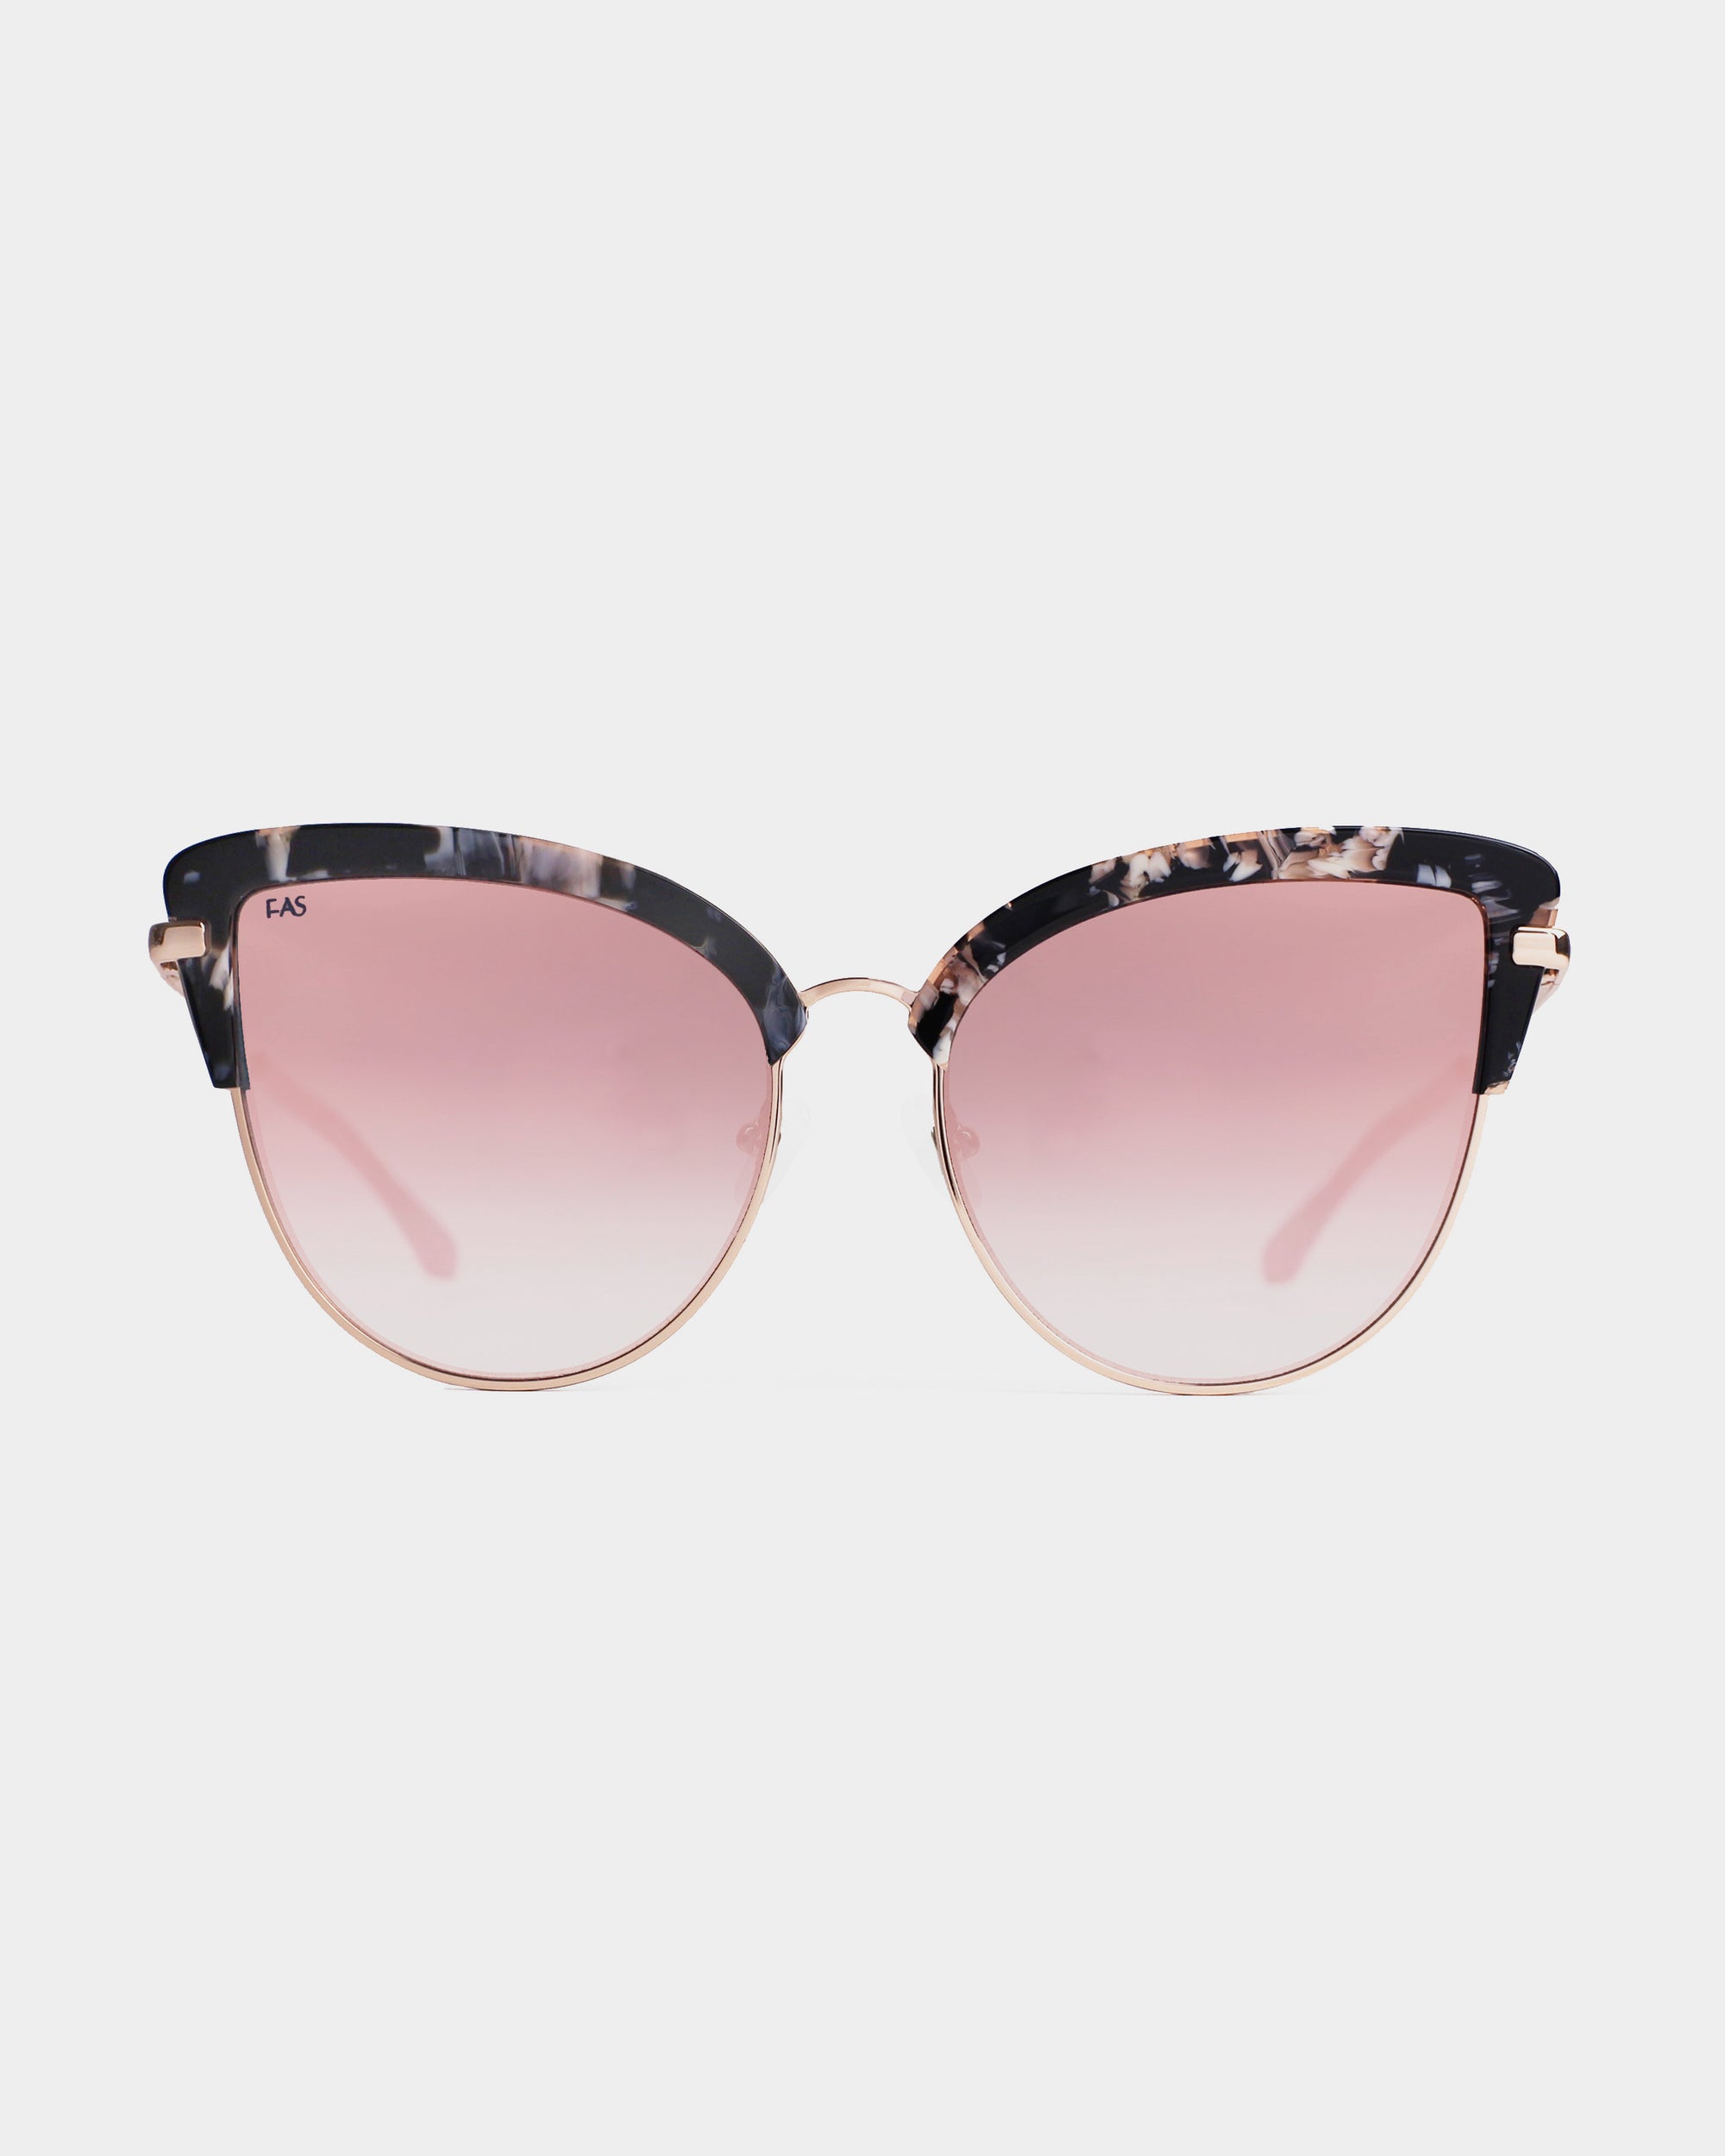 A pair of cat-eye sunglasses with a unique design. The top half of the frame features a black and white marbled pattern, while the lower half and the temples boast 18-karat gold plating. The nylon lenses are pink and gradient from darker at the top to lighter at the bottom. Introducing **Venus by For Art's Sake®**.